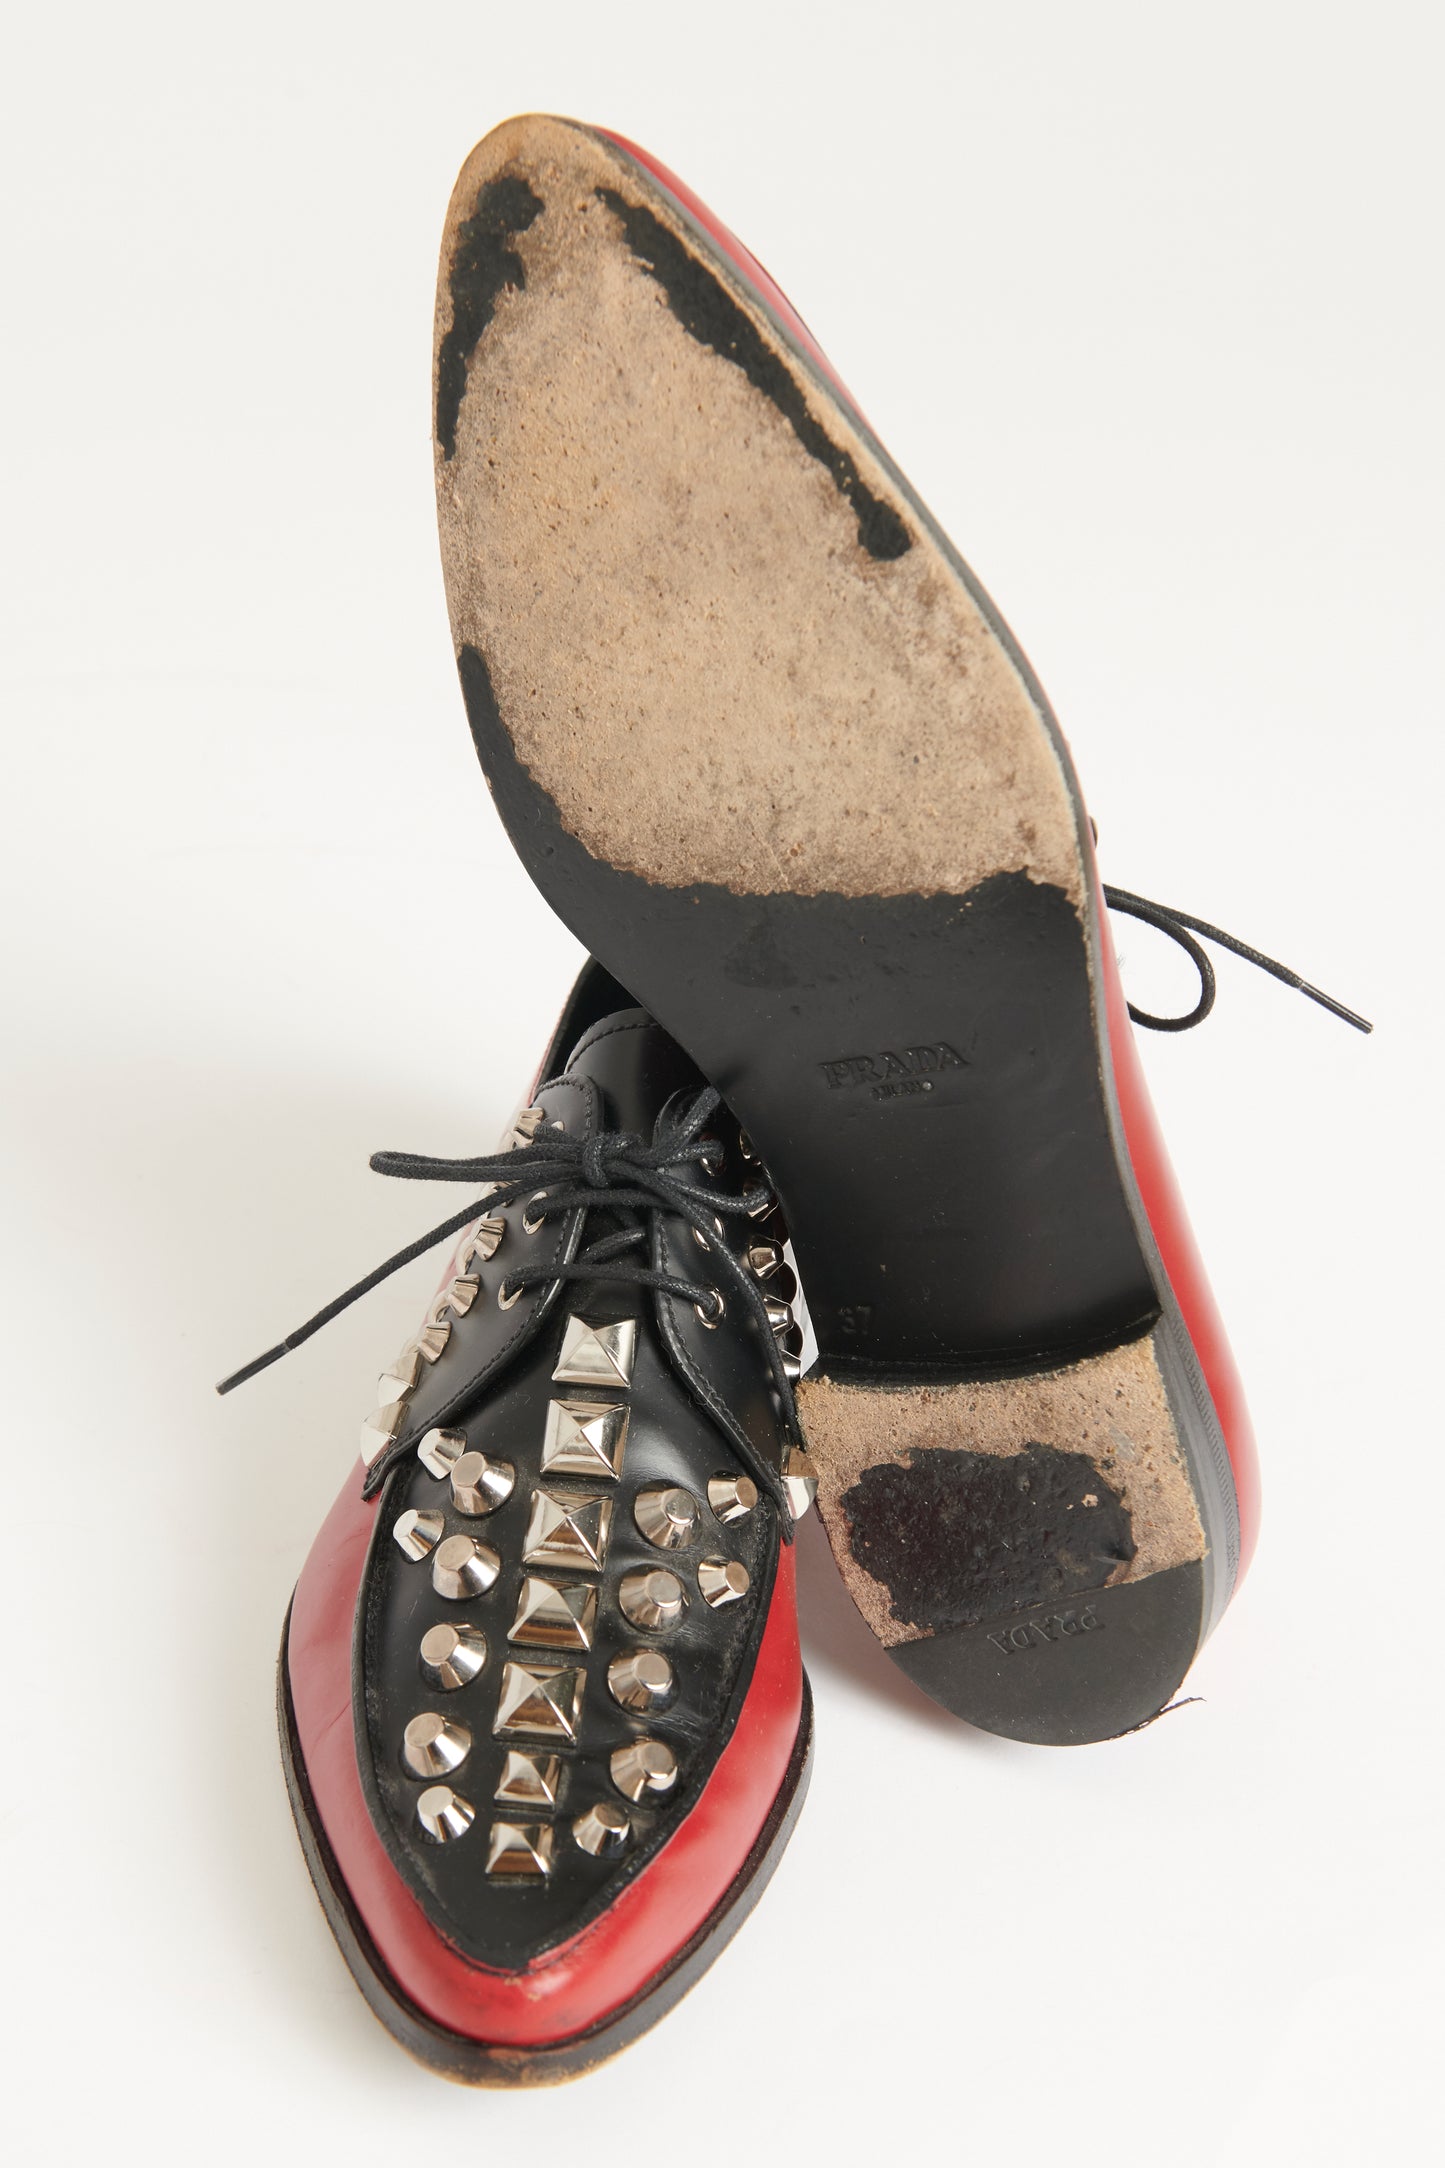 Red and Black Studded Preowned Derby Shoes